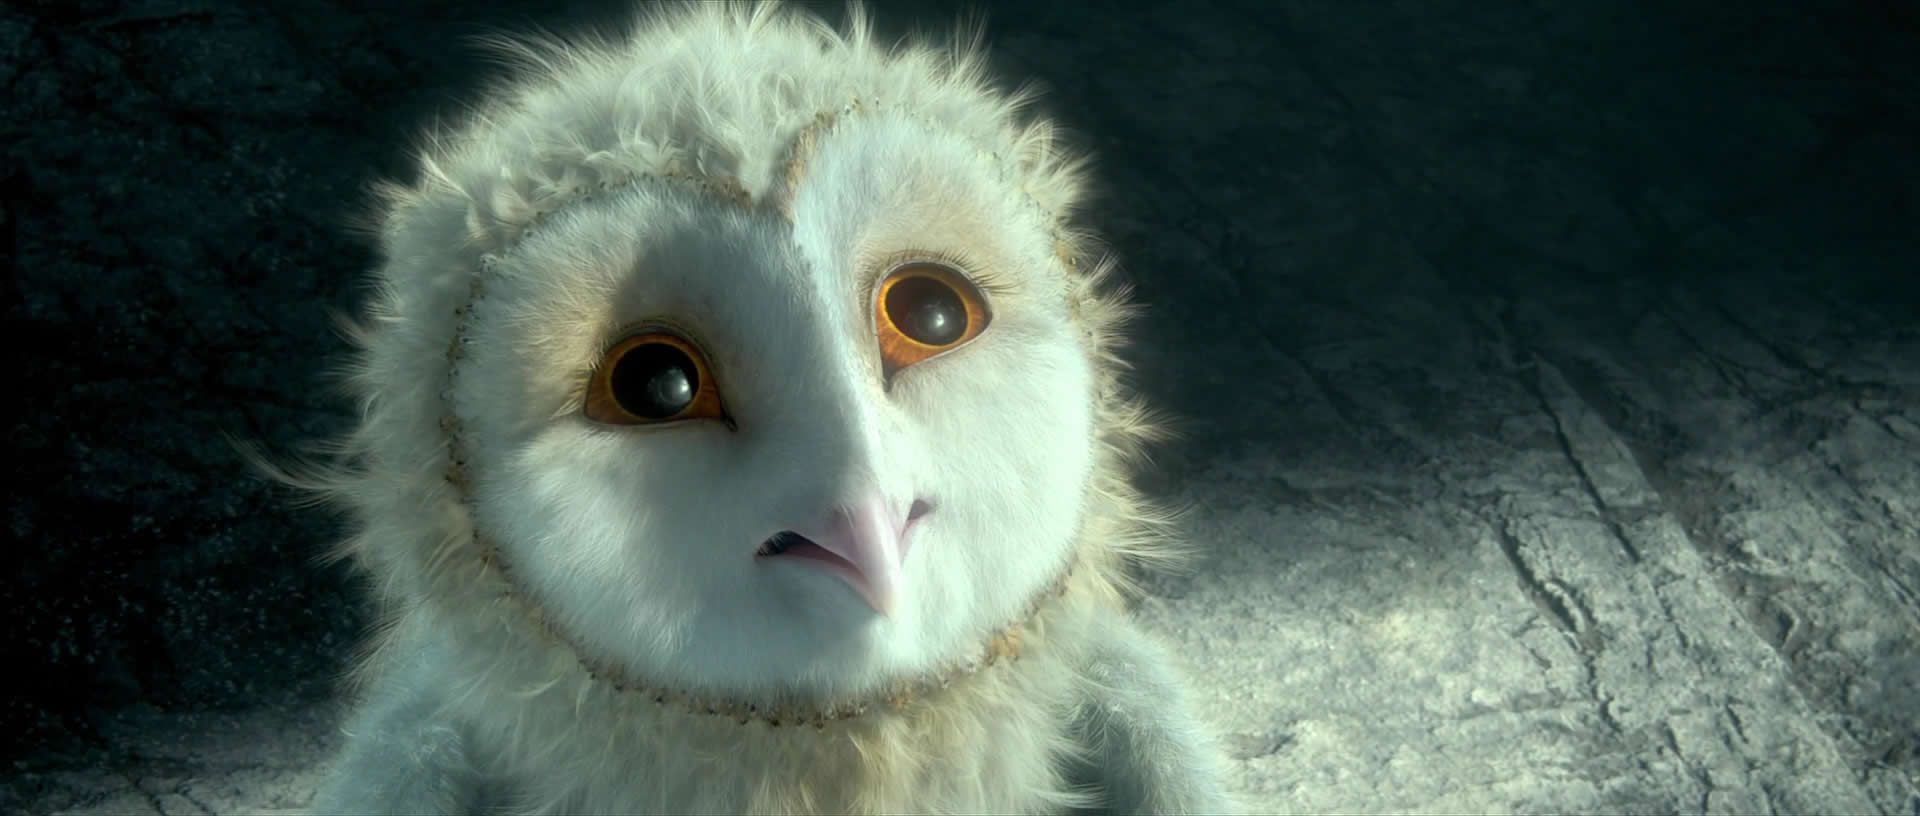 movie, legend of the guardians: the owls of ga'hoole, bird